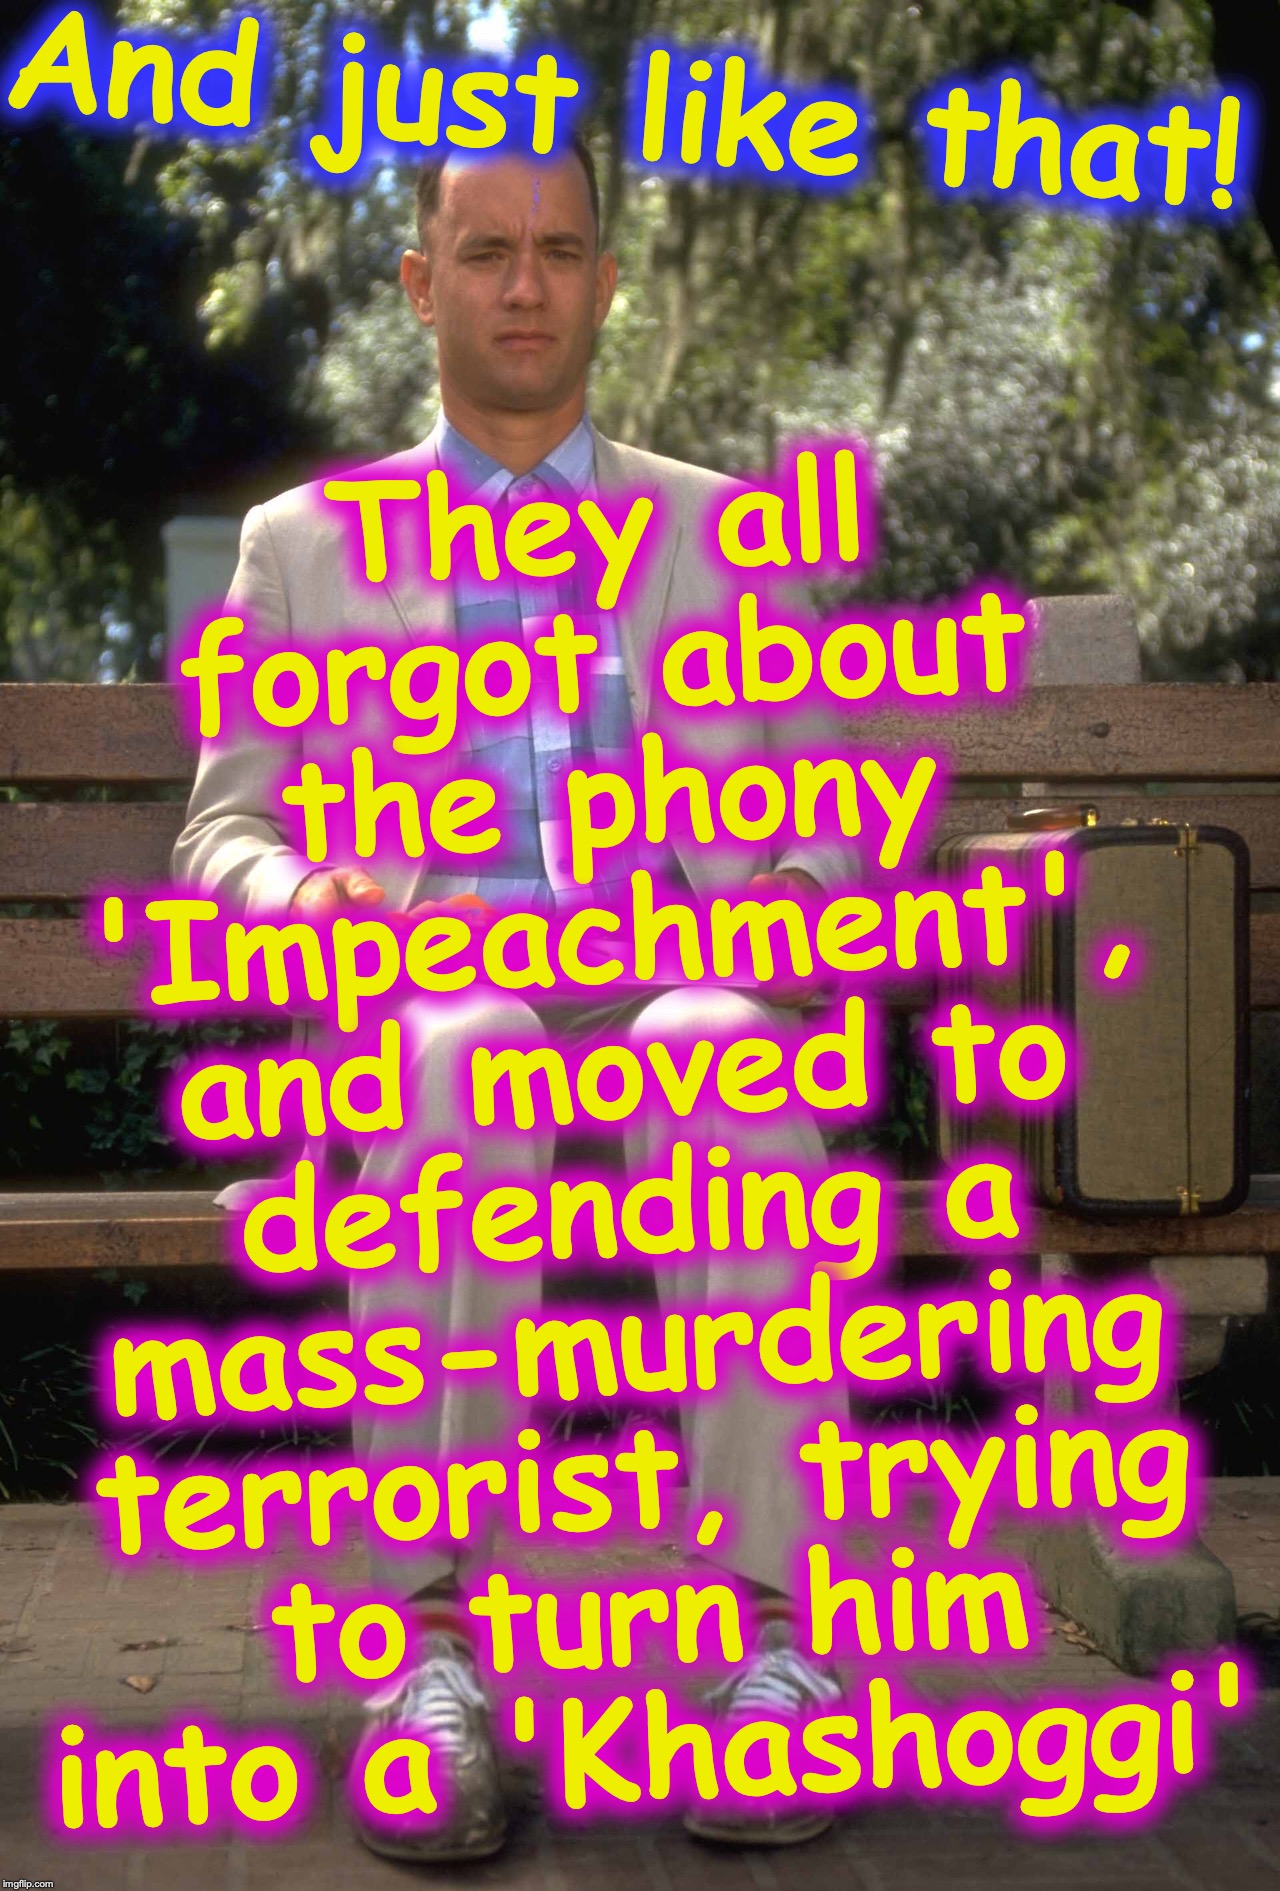 Forrest Gump | They all forgot about the phony 'Impeachment', and moved to defending a mass-murdering terrorist, trying to turn him into a 'Khashoggi'; And just like that! | image tagged in forrest gump,terrorist,impeachment | made w/ Imgflip meme maker